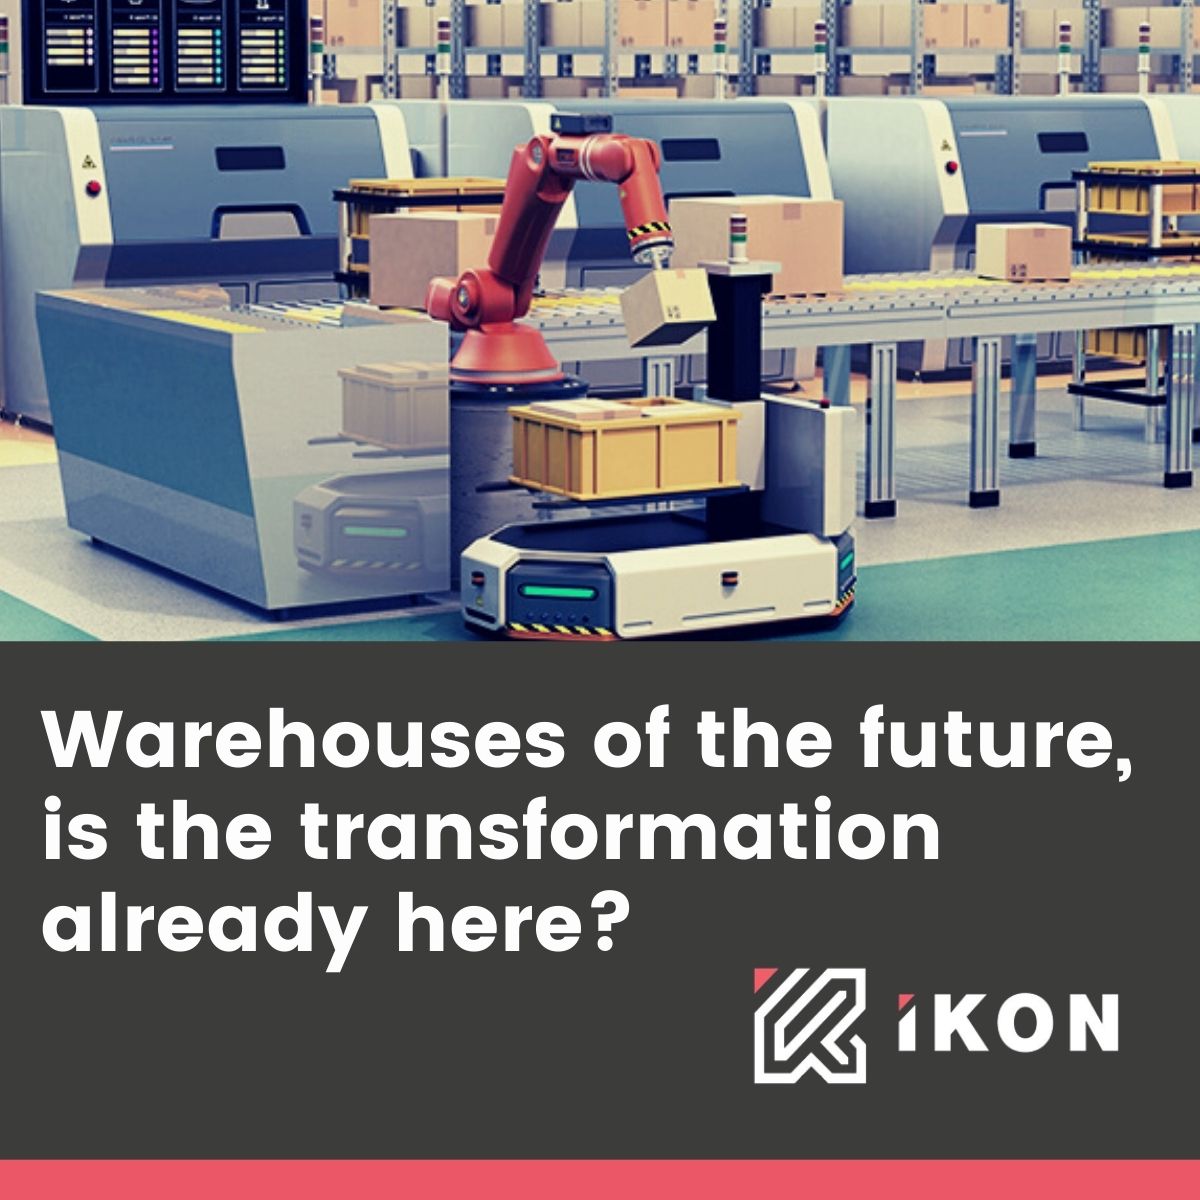 WAREHOUSES OF THE FUTURE, IS THE TRANSFORMATION ALREADY HERE?